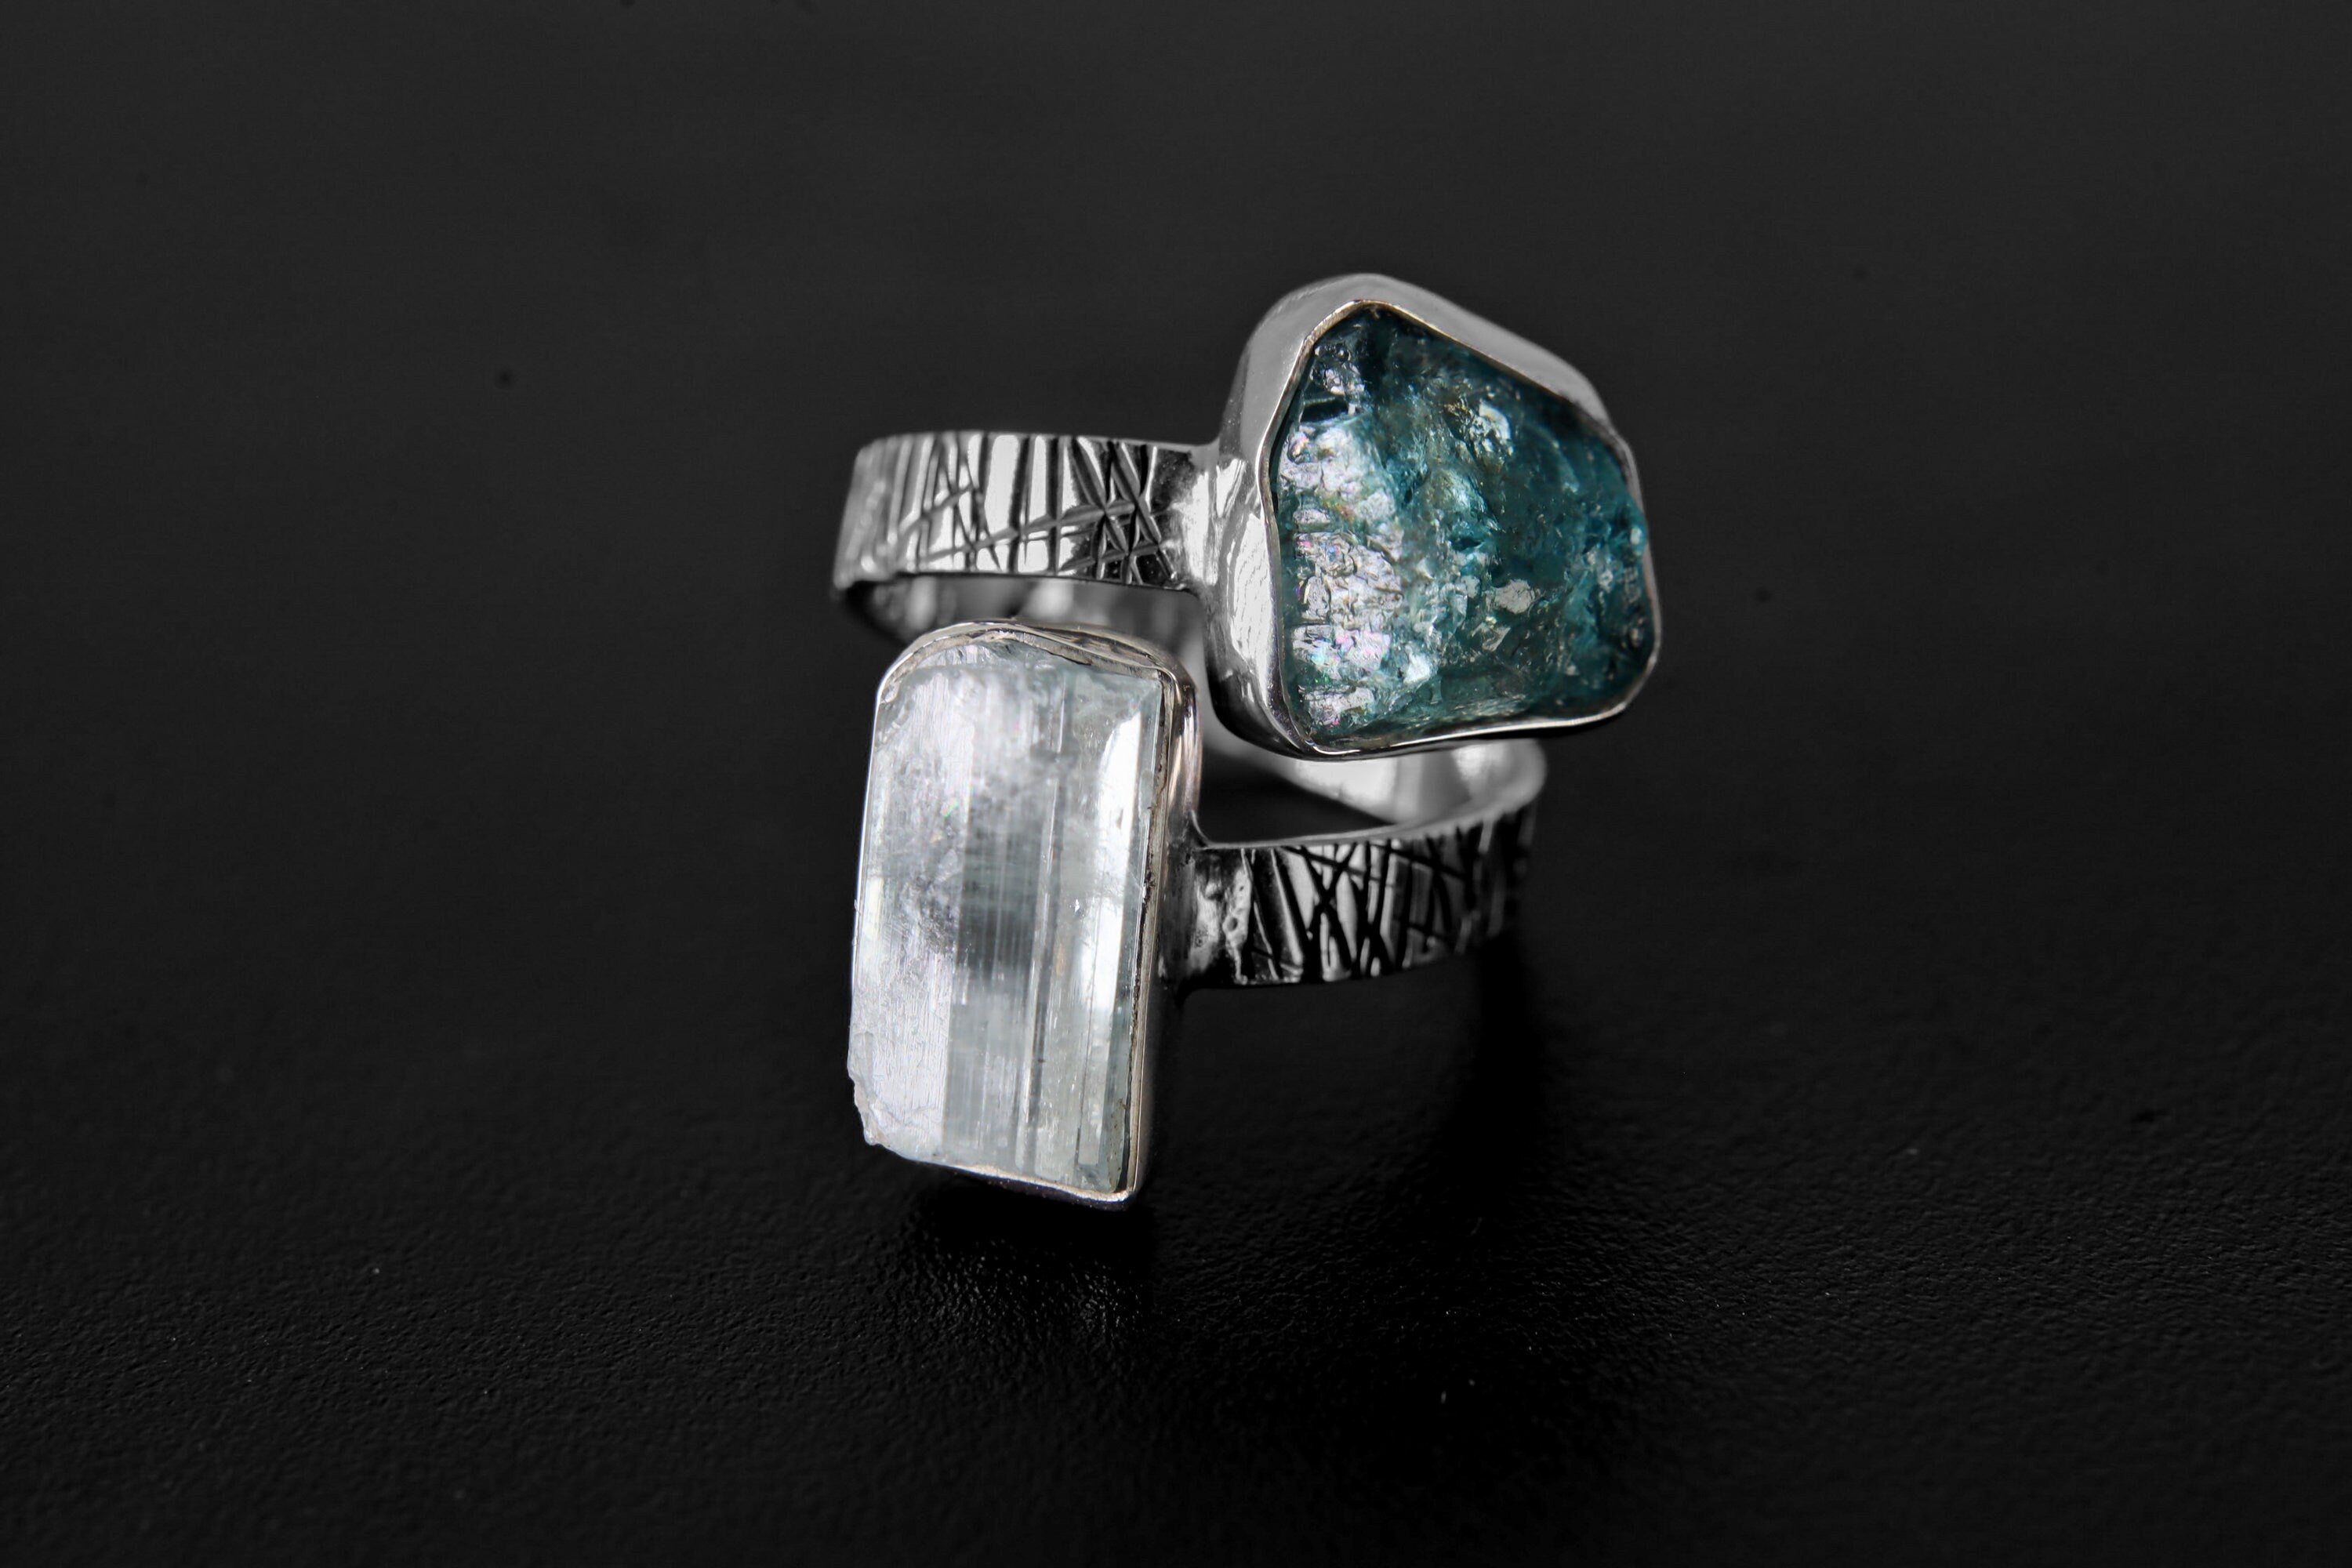 Gem Aquamarine, Blue Crystal Apatite - 925 Sterling Silver - Double Stone - Textured, High Shine Polish - Adjustable Open Ring Band